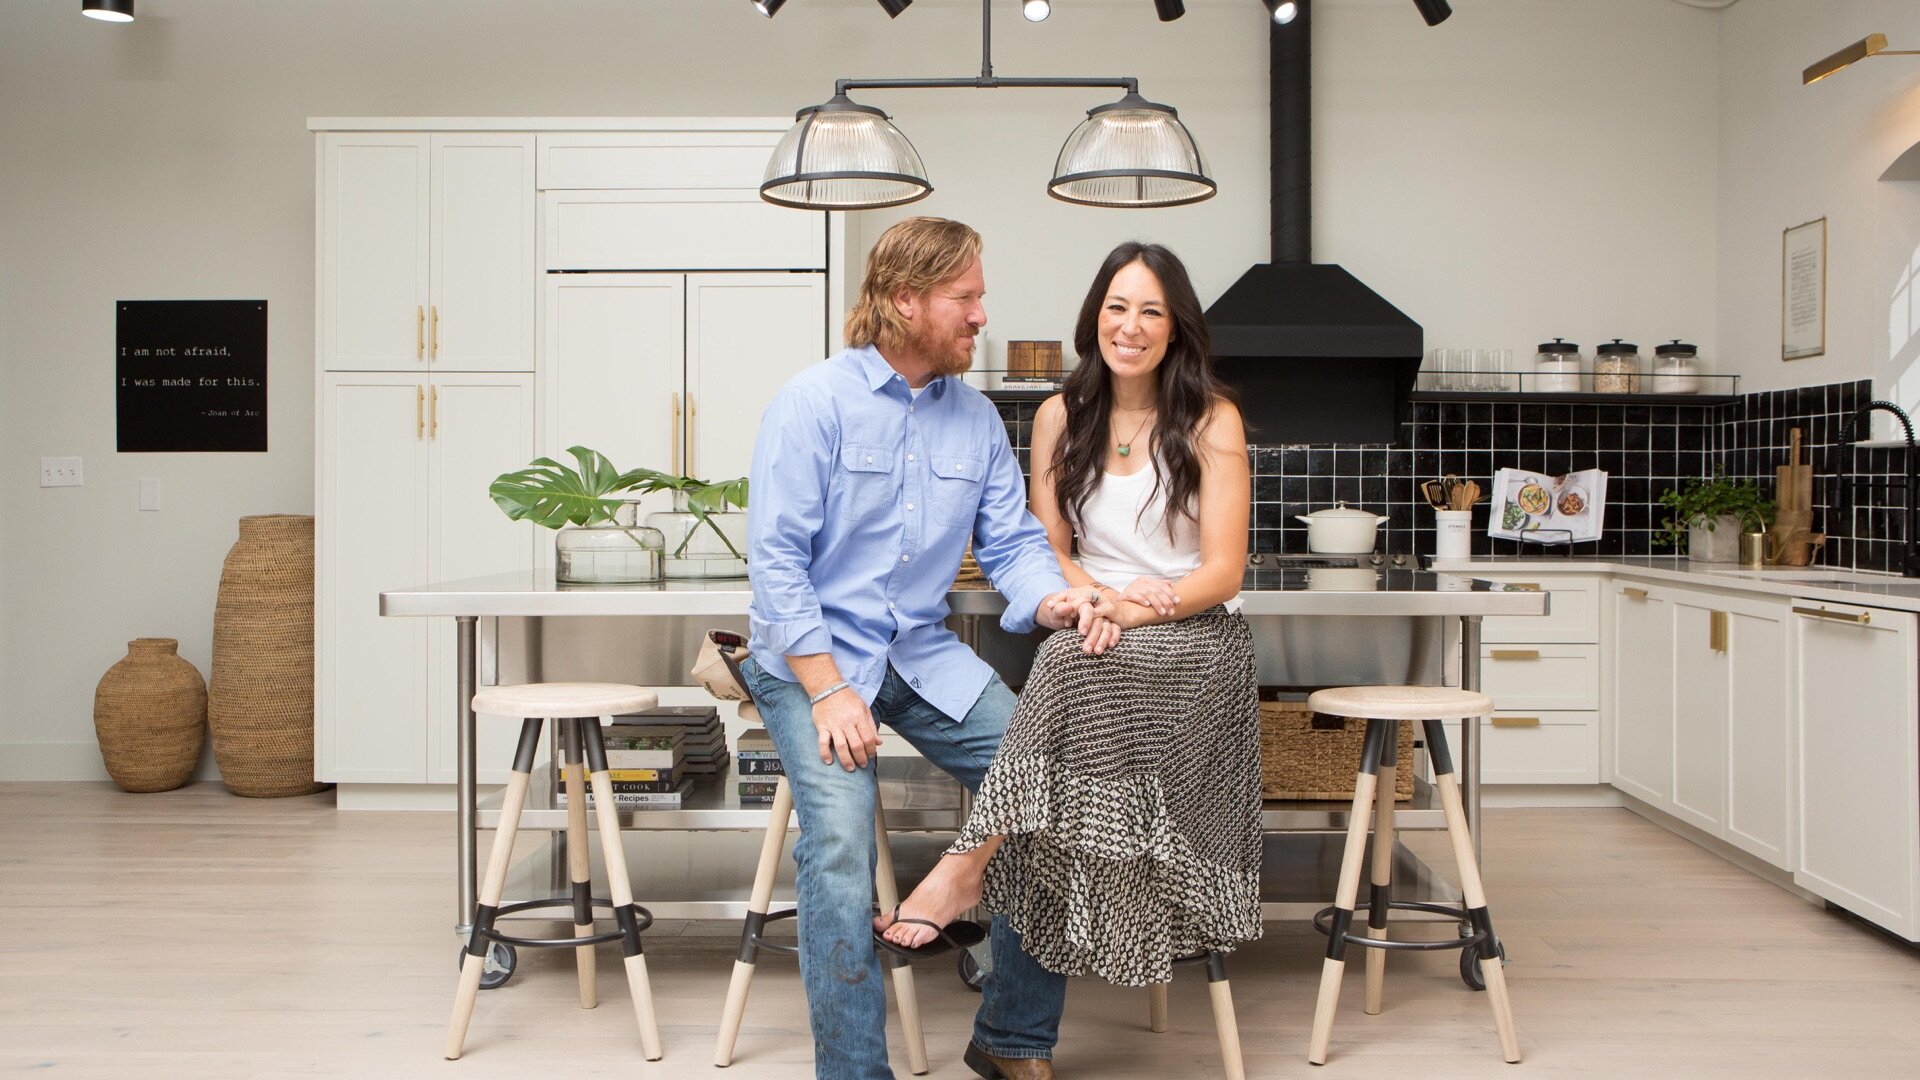 Fixer Upper S5E15 A Downtown Loft Challenge for Chip and Jo